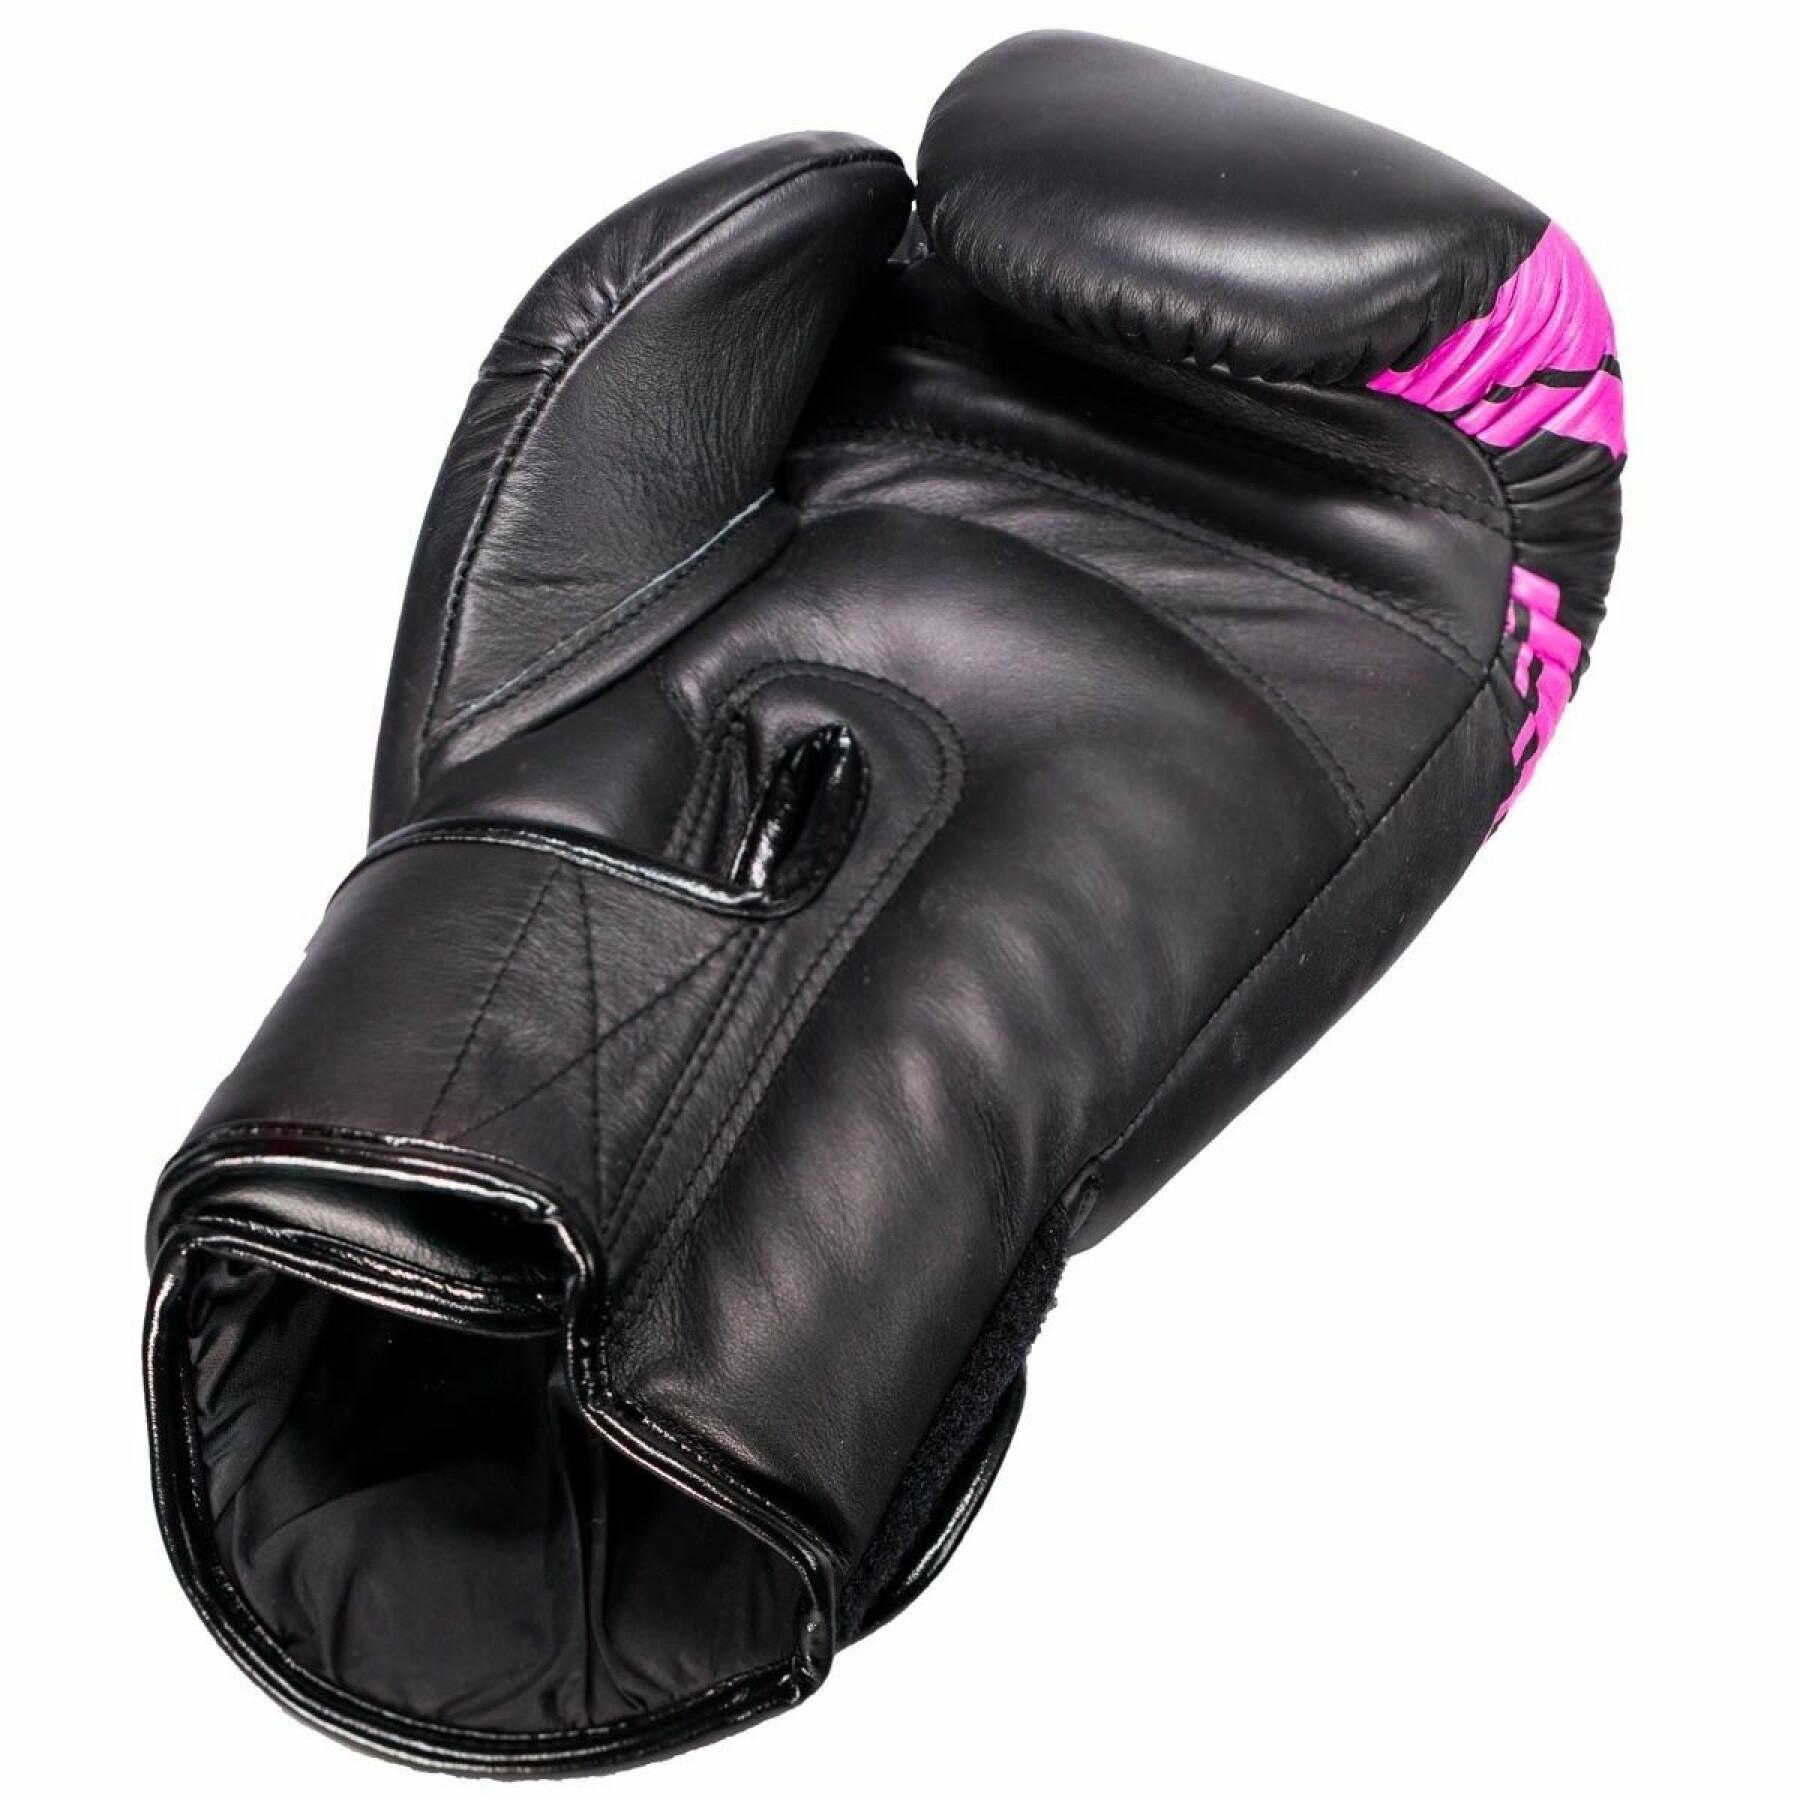 Boxing gloves Booster Fight Gear Bgl 1 V3